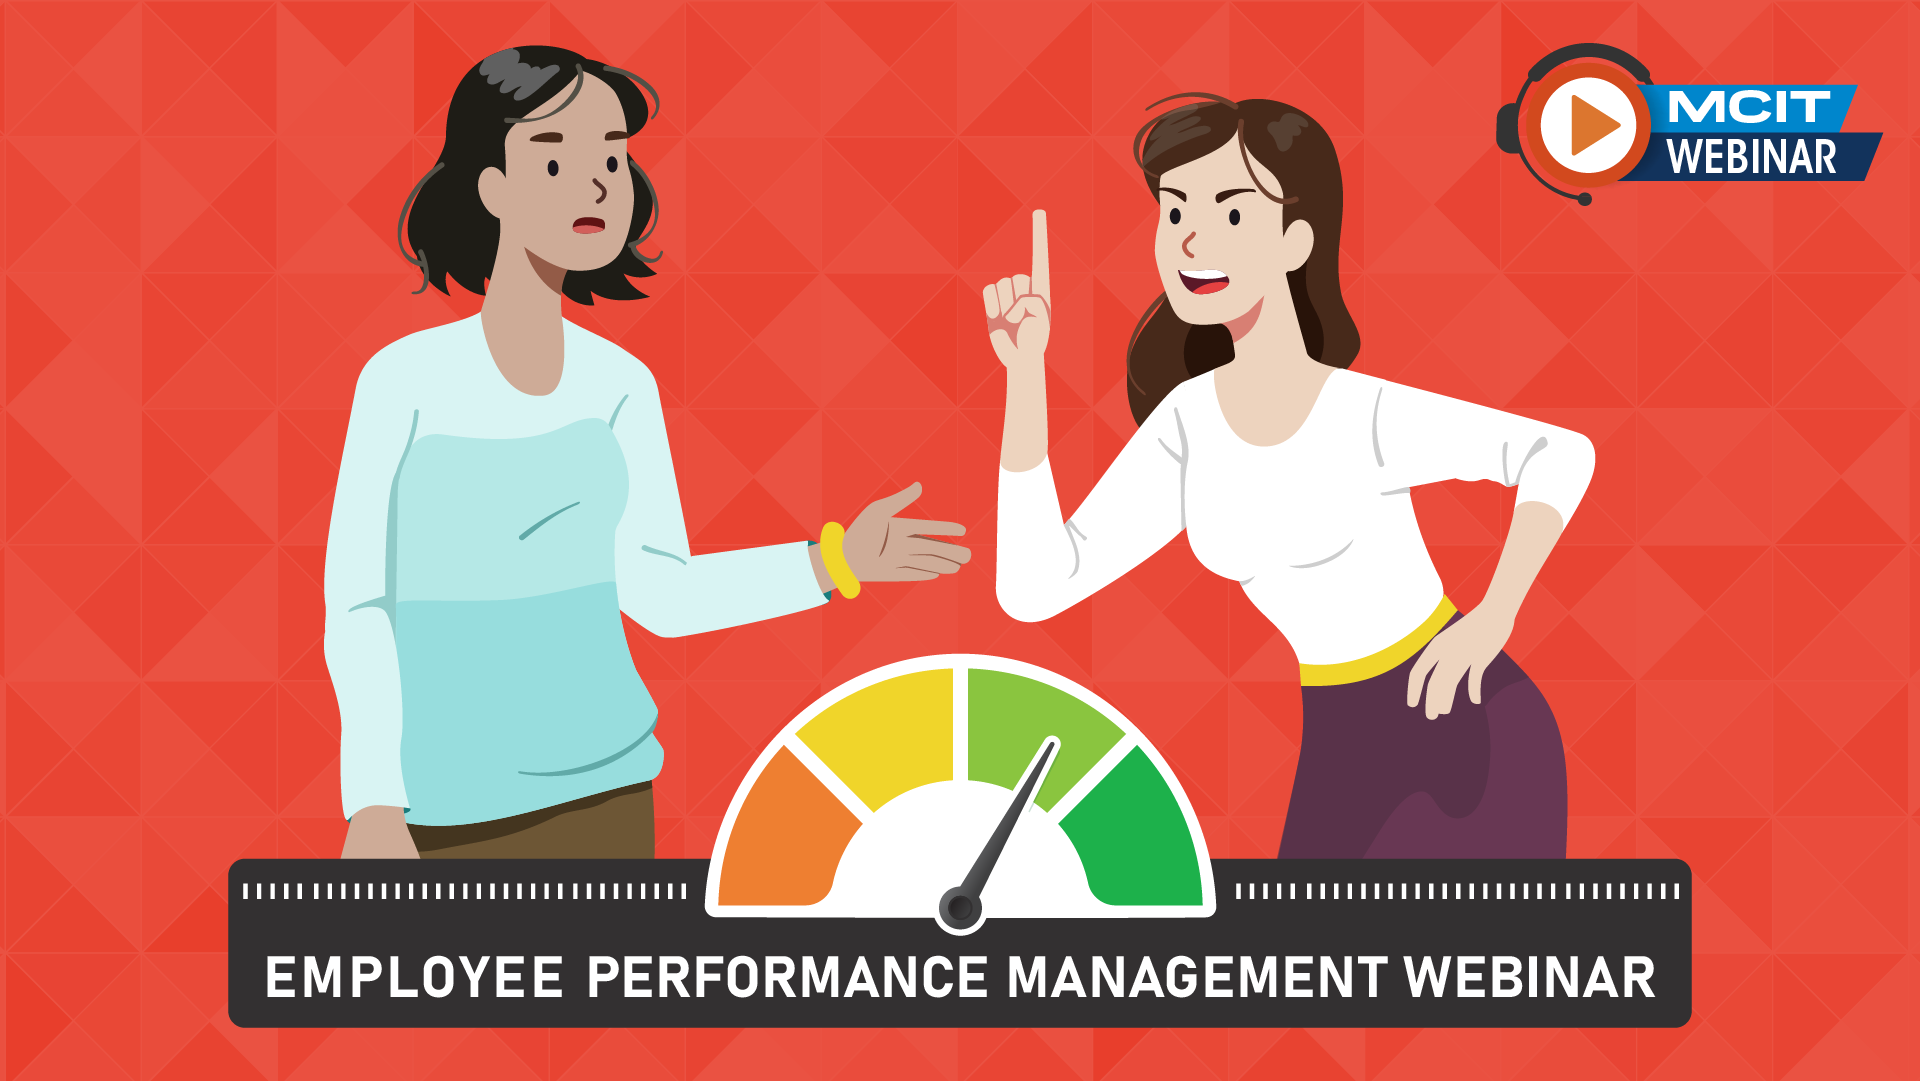 Two woman having an intense conversation. One looks like she is trying to calm the situation with other woman waving her finger. Red background with triangle background. Color dial pointing at green. Employee Performance Management Webinar - MCIT Webinar